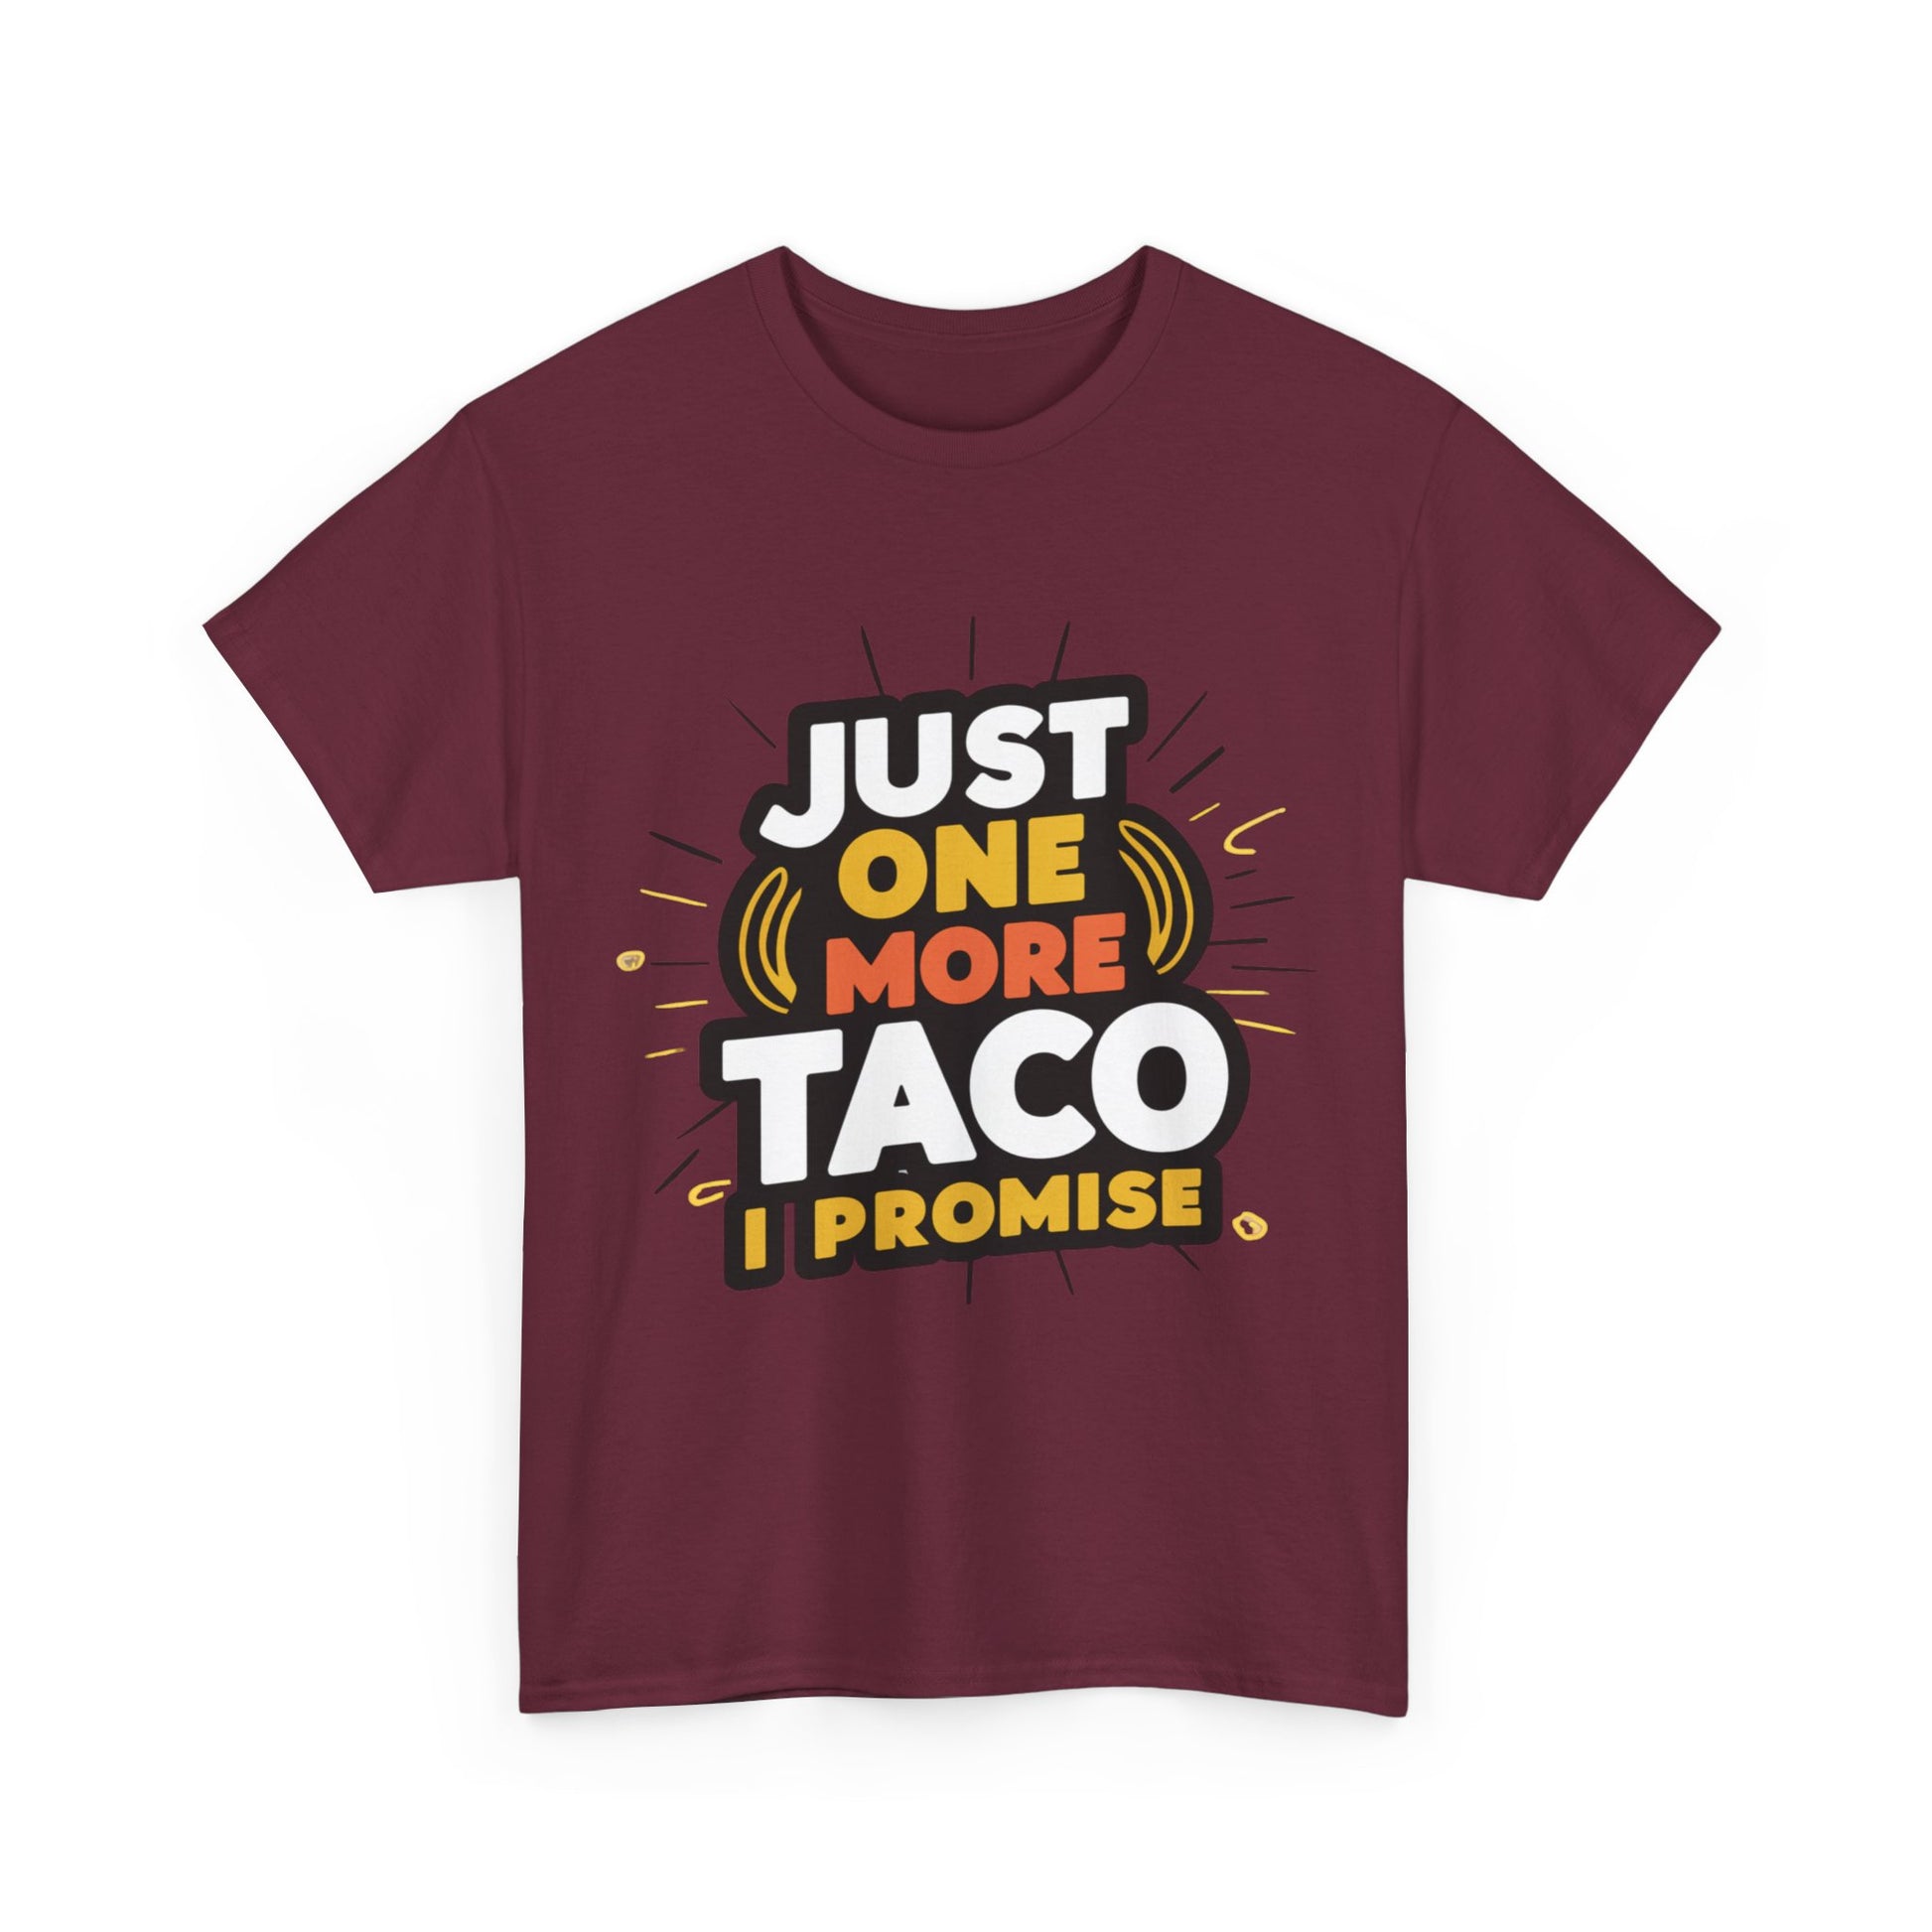 Just One More Taco I Promise Mexican Food Graphic Unisex Heavy Cotton Tee Cotton Funny Humorous Graphic Soft Premium Unisex Men Women Maroon T-shirt Birthday Gift-27